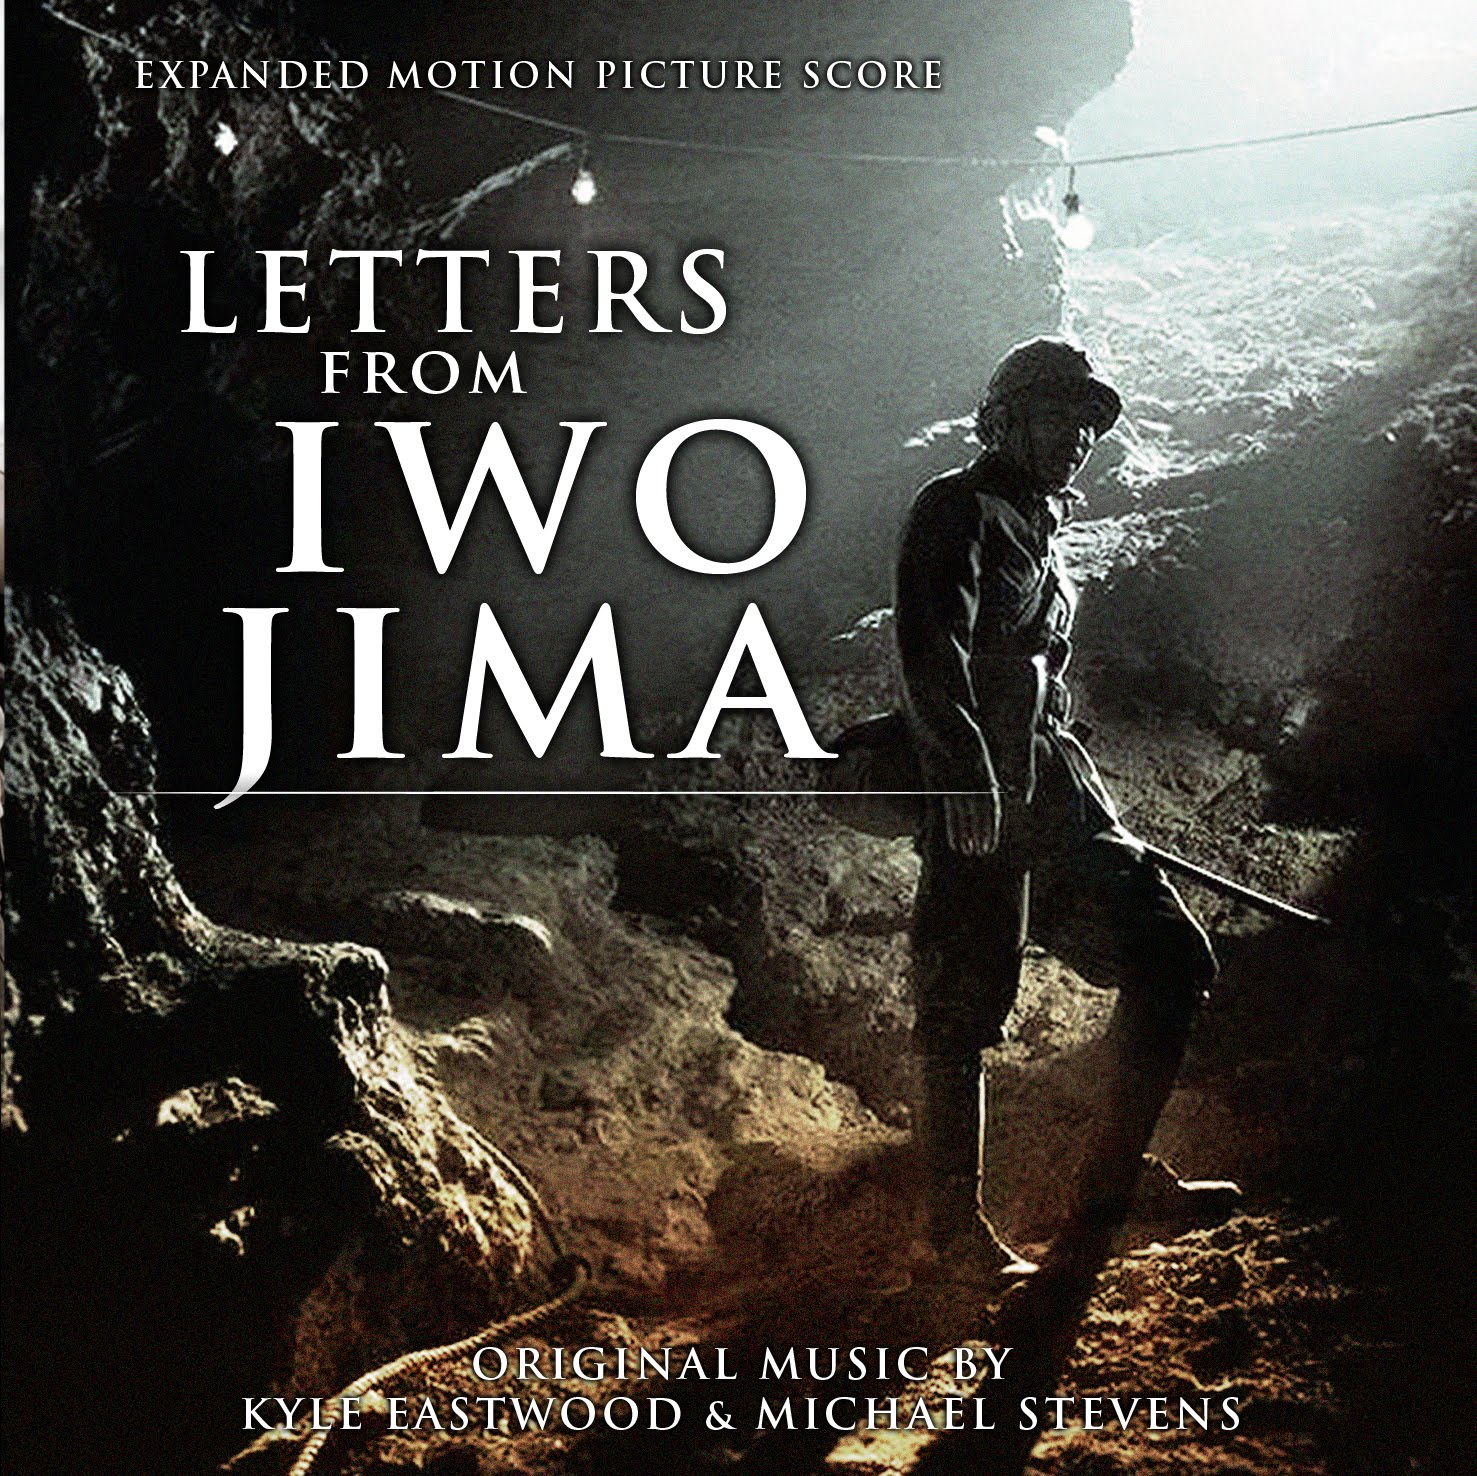 letters%2Bfrom%2Biwo%2Bjima%2Bexpanded%2Bfrontsmall.jpg